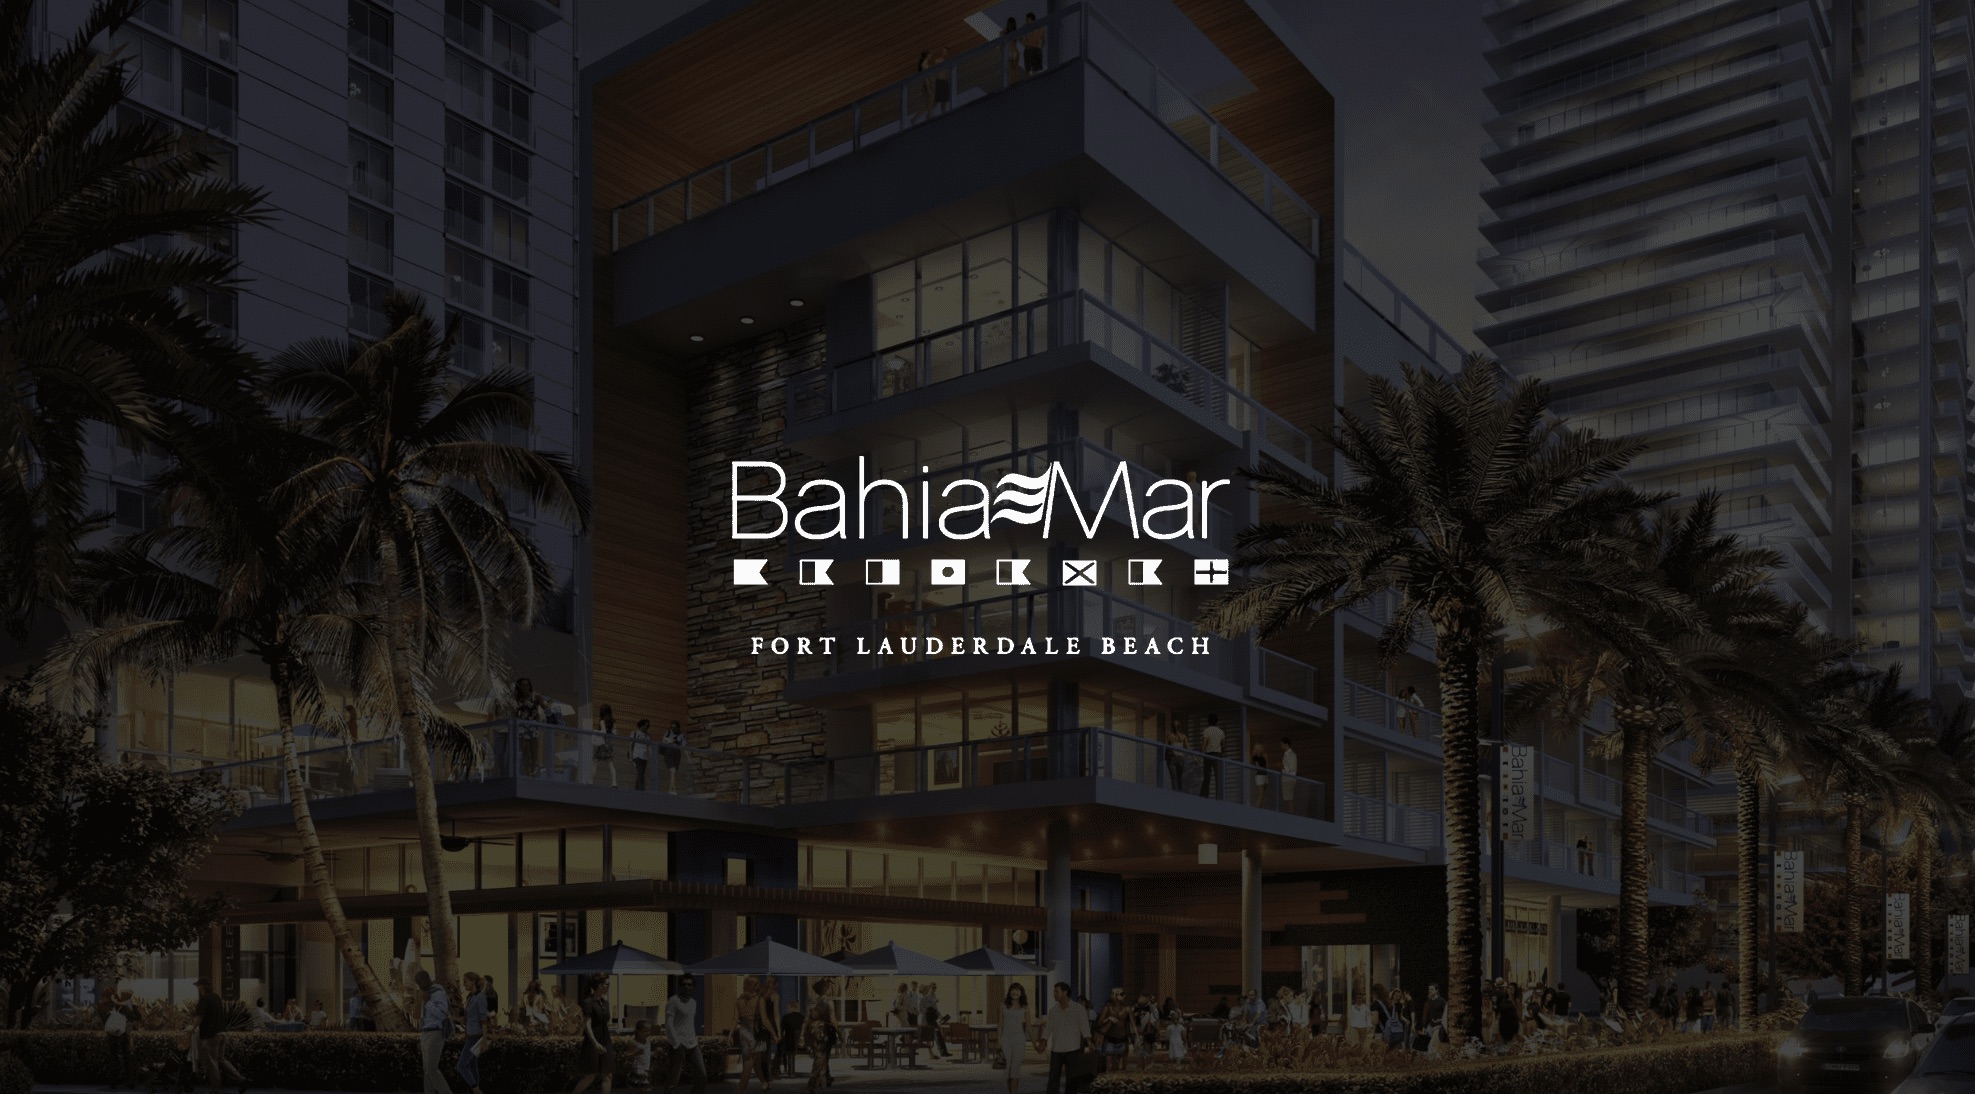 White Bahia Mar Condominiums Fort Lauderdale Beach logo against a dimmed background of the building